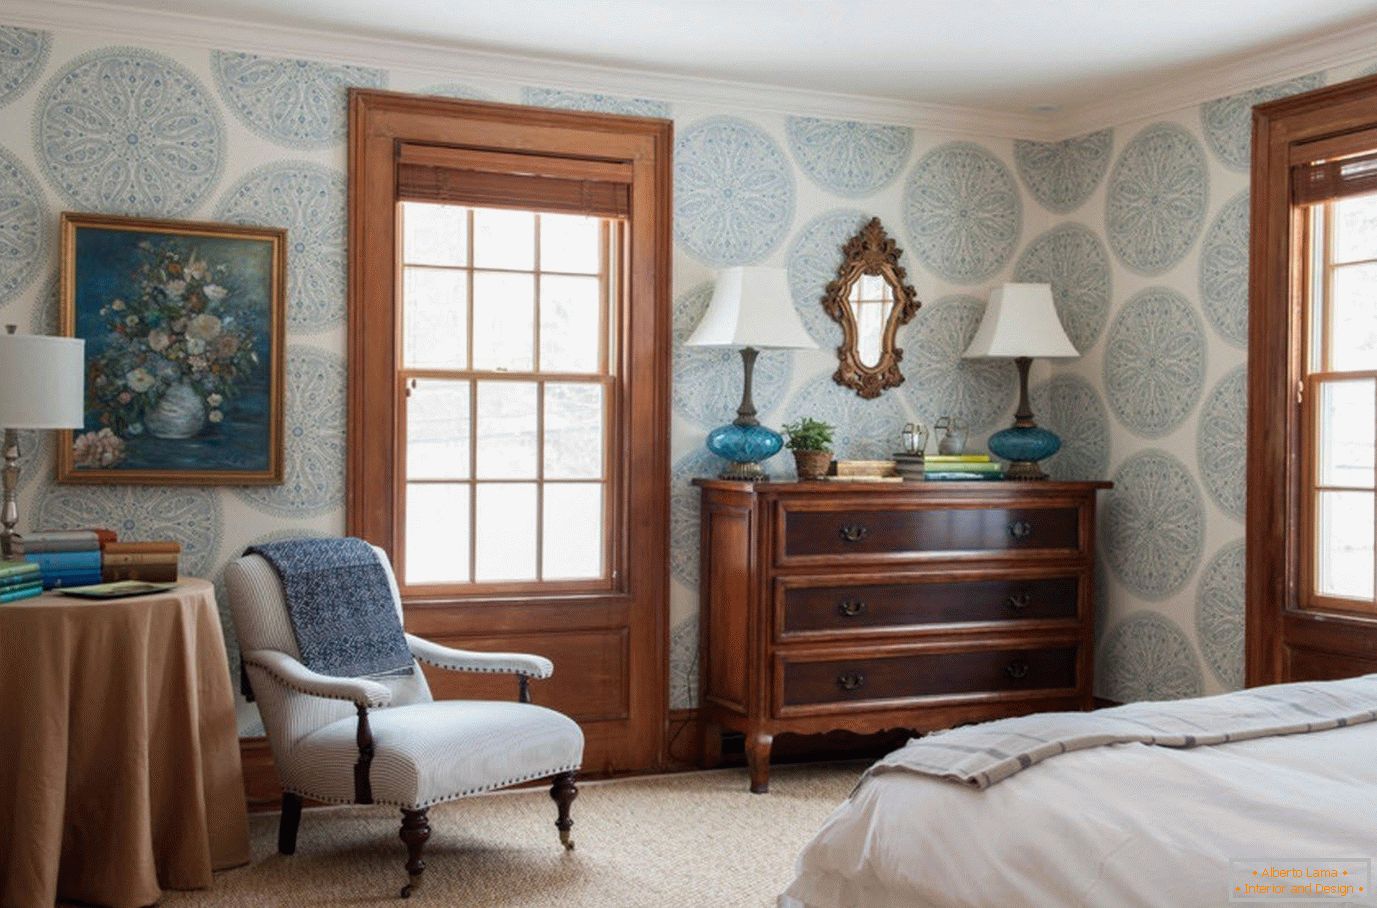 Blue wallpaper with an ornament in the bedroom